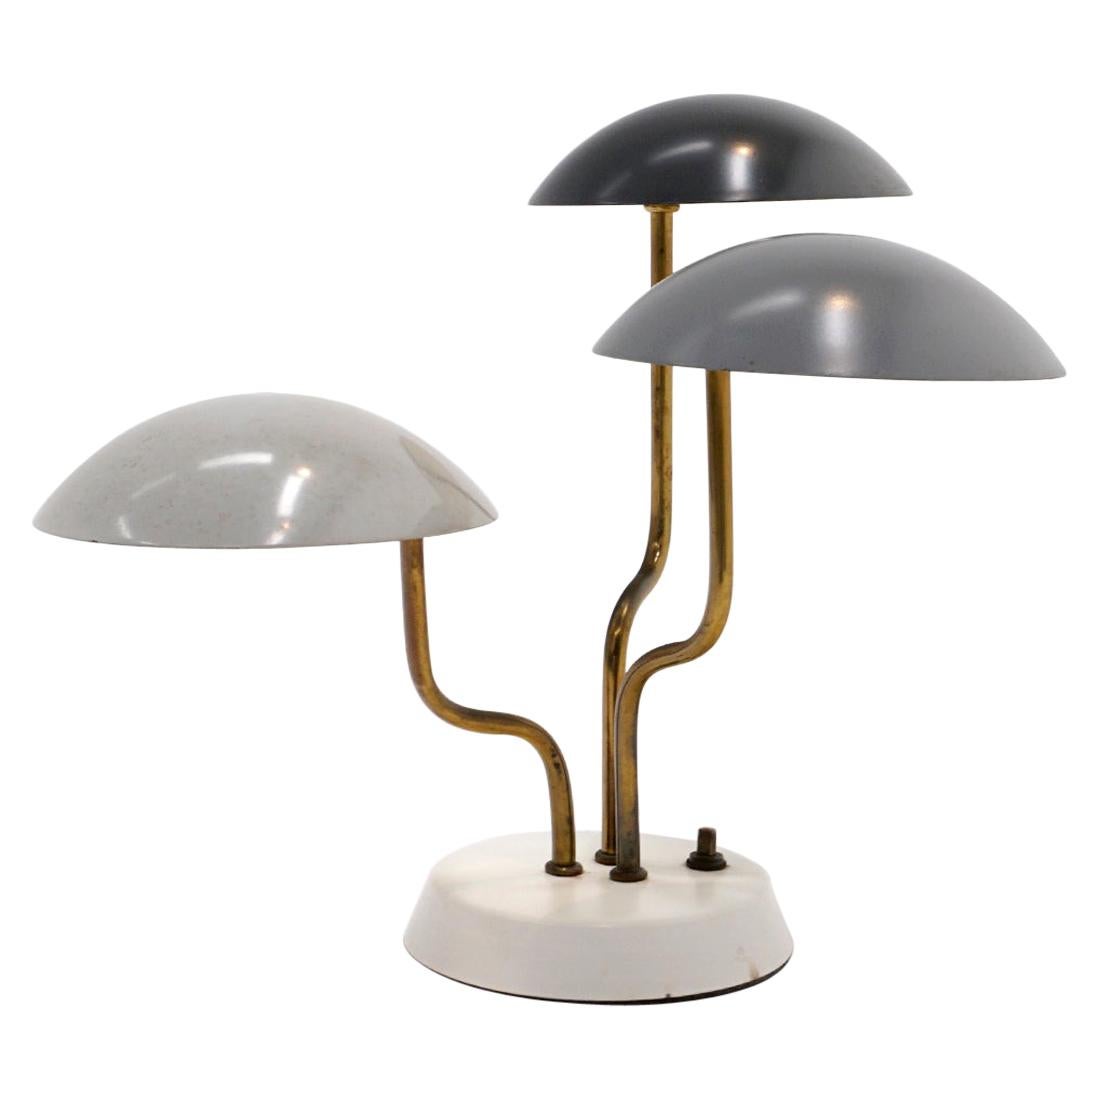 Three Shade Table Lamp, Monochrome Gray & Brass by Gino Sarfatti for Arteluce For Sale